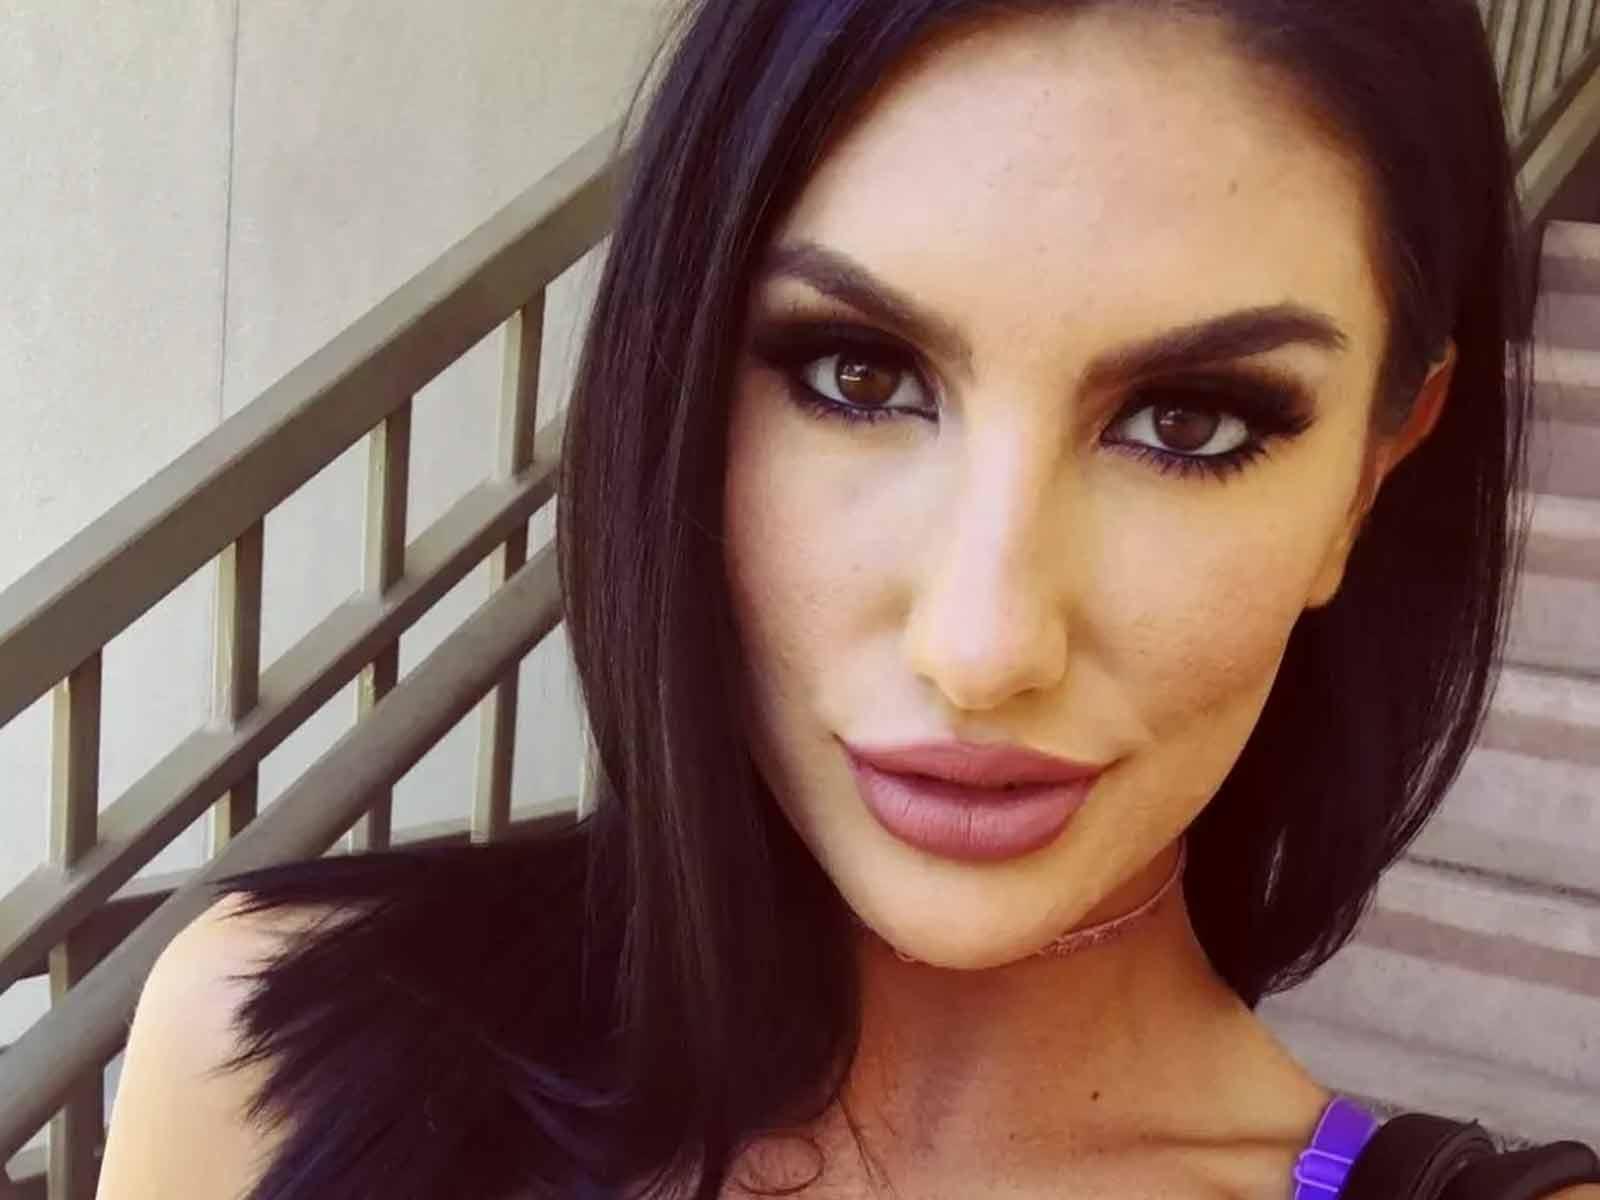 Porn Star August Ames Had Cocaine, Anti-Depressants, Marijuana and Other Drugs in Her System When She Died